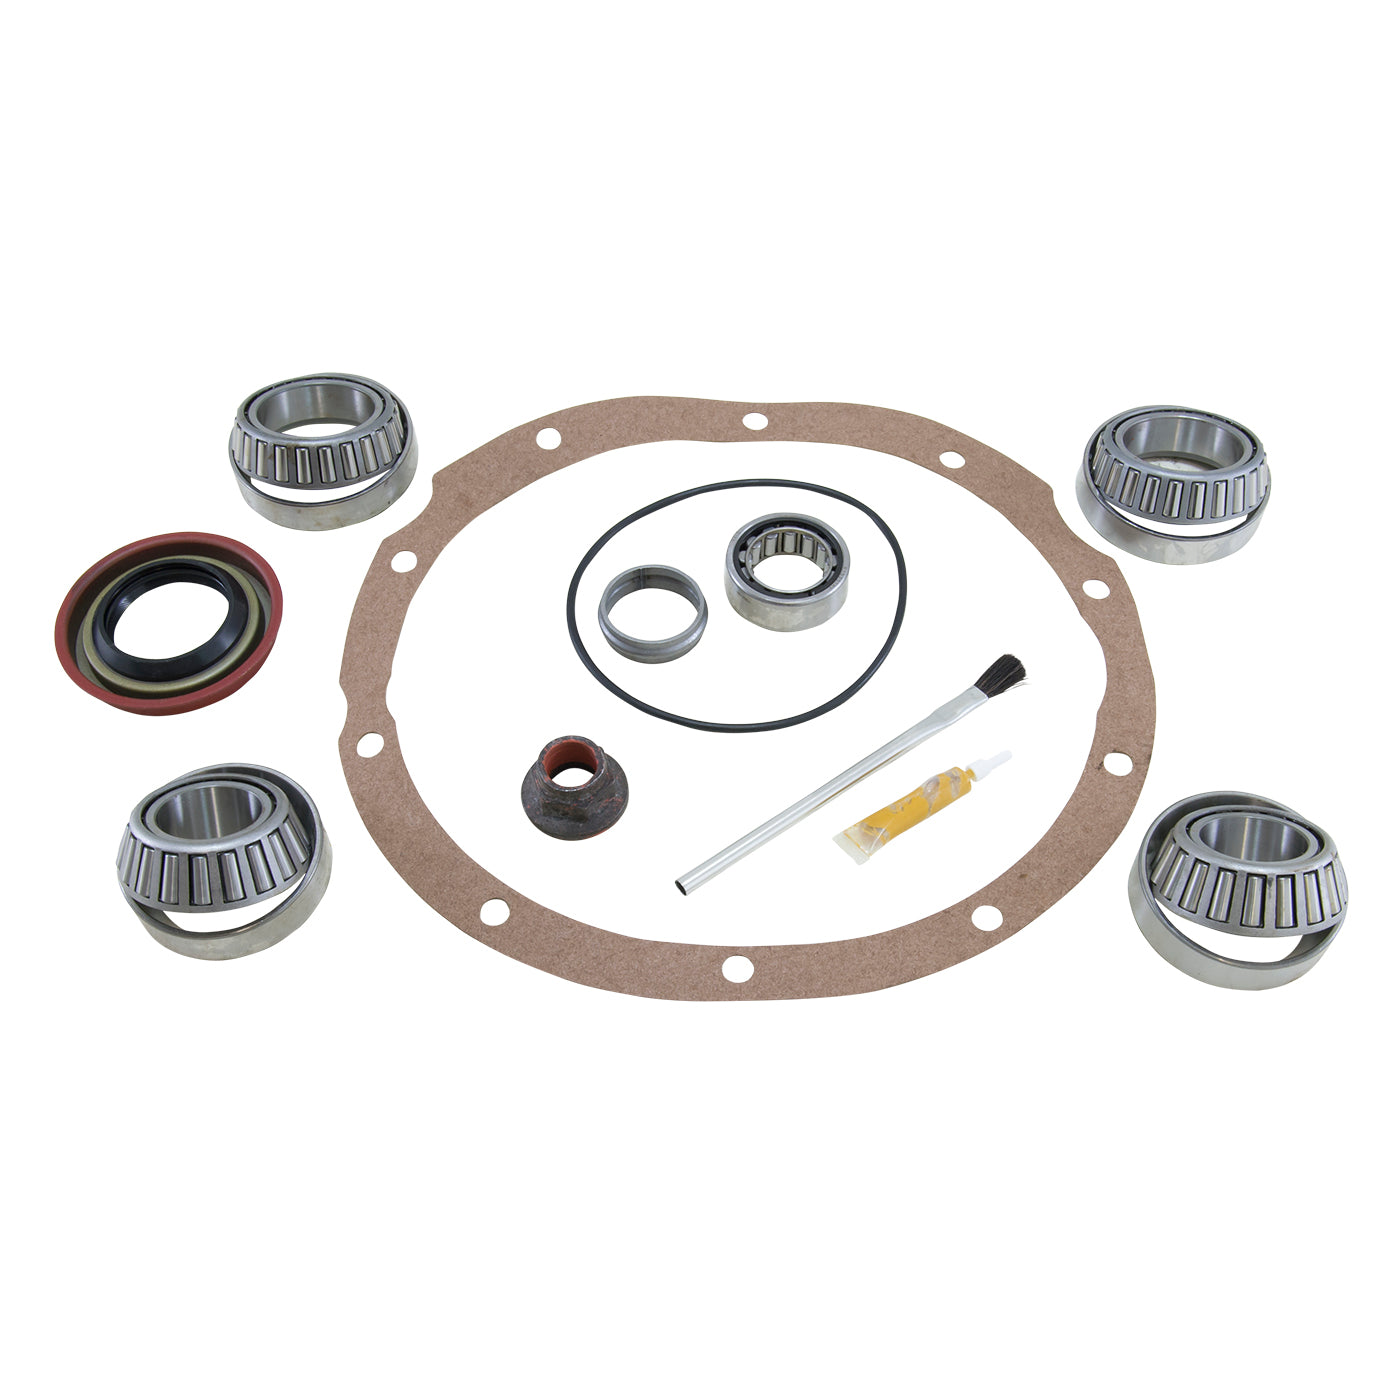 Yukon Gear Bearing install kit for Ford 8" differential BK F8-HD